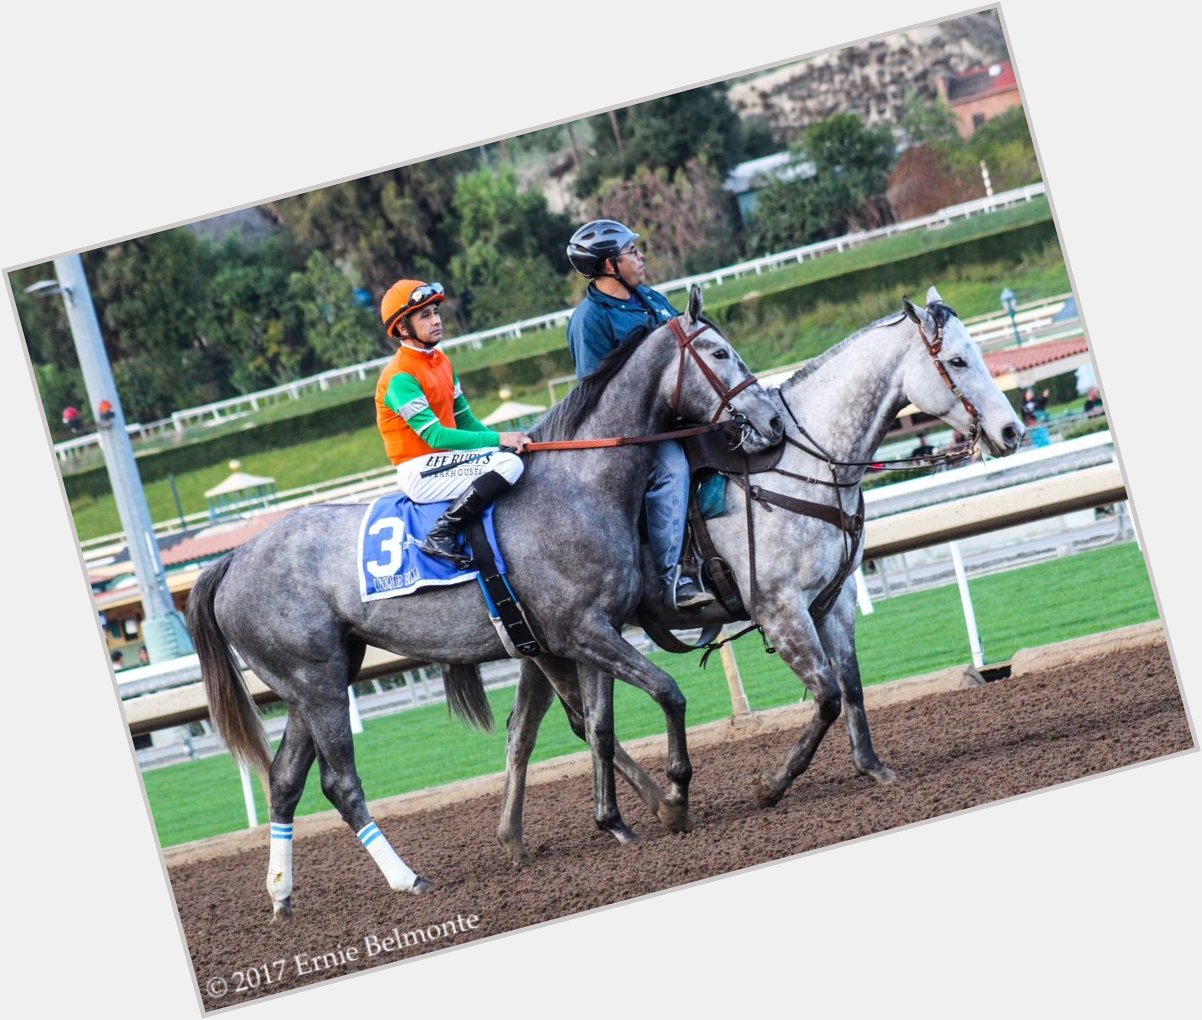 Happy Birthday to Hall of Fame jockey Mike Smith. Here he is on UniqueBella earlier this year before one of her wins 